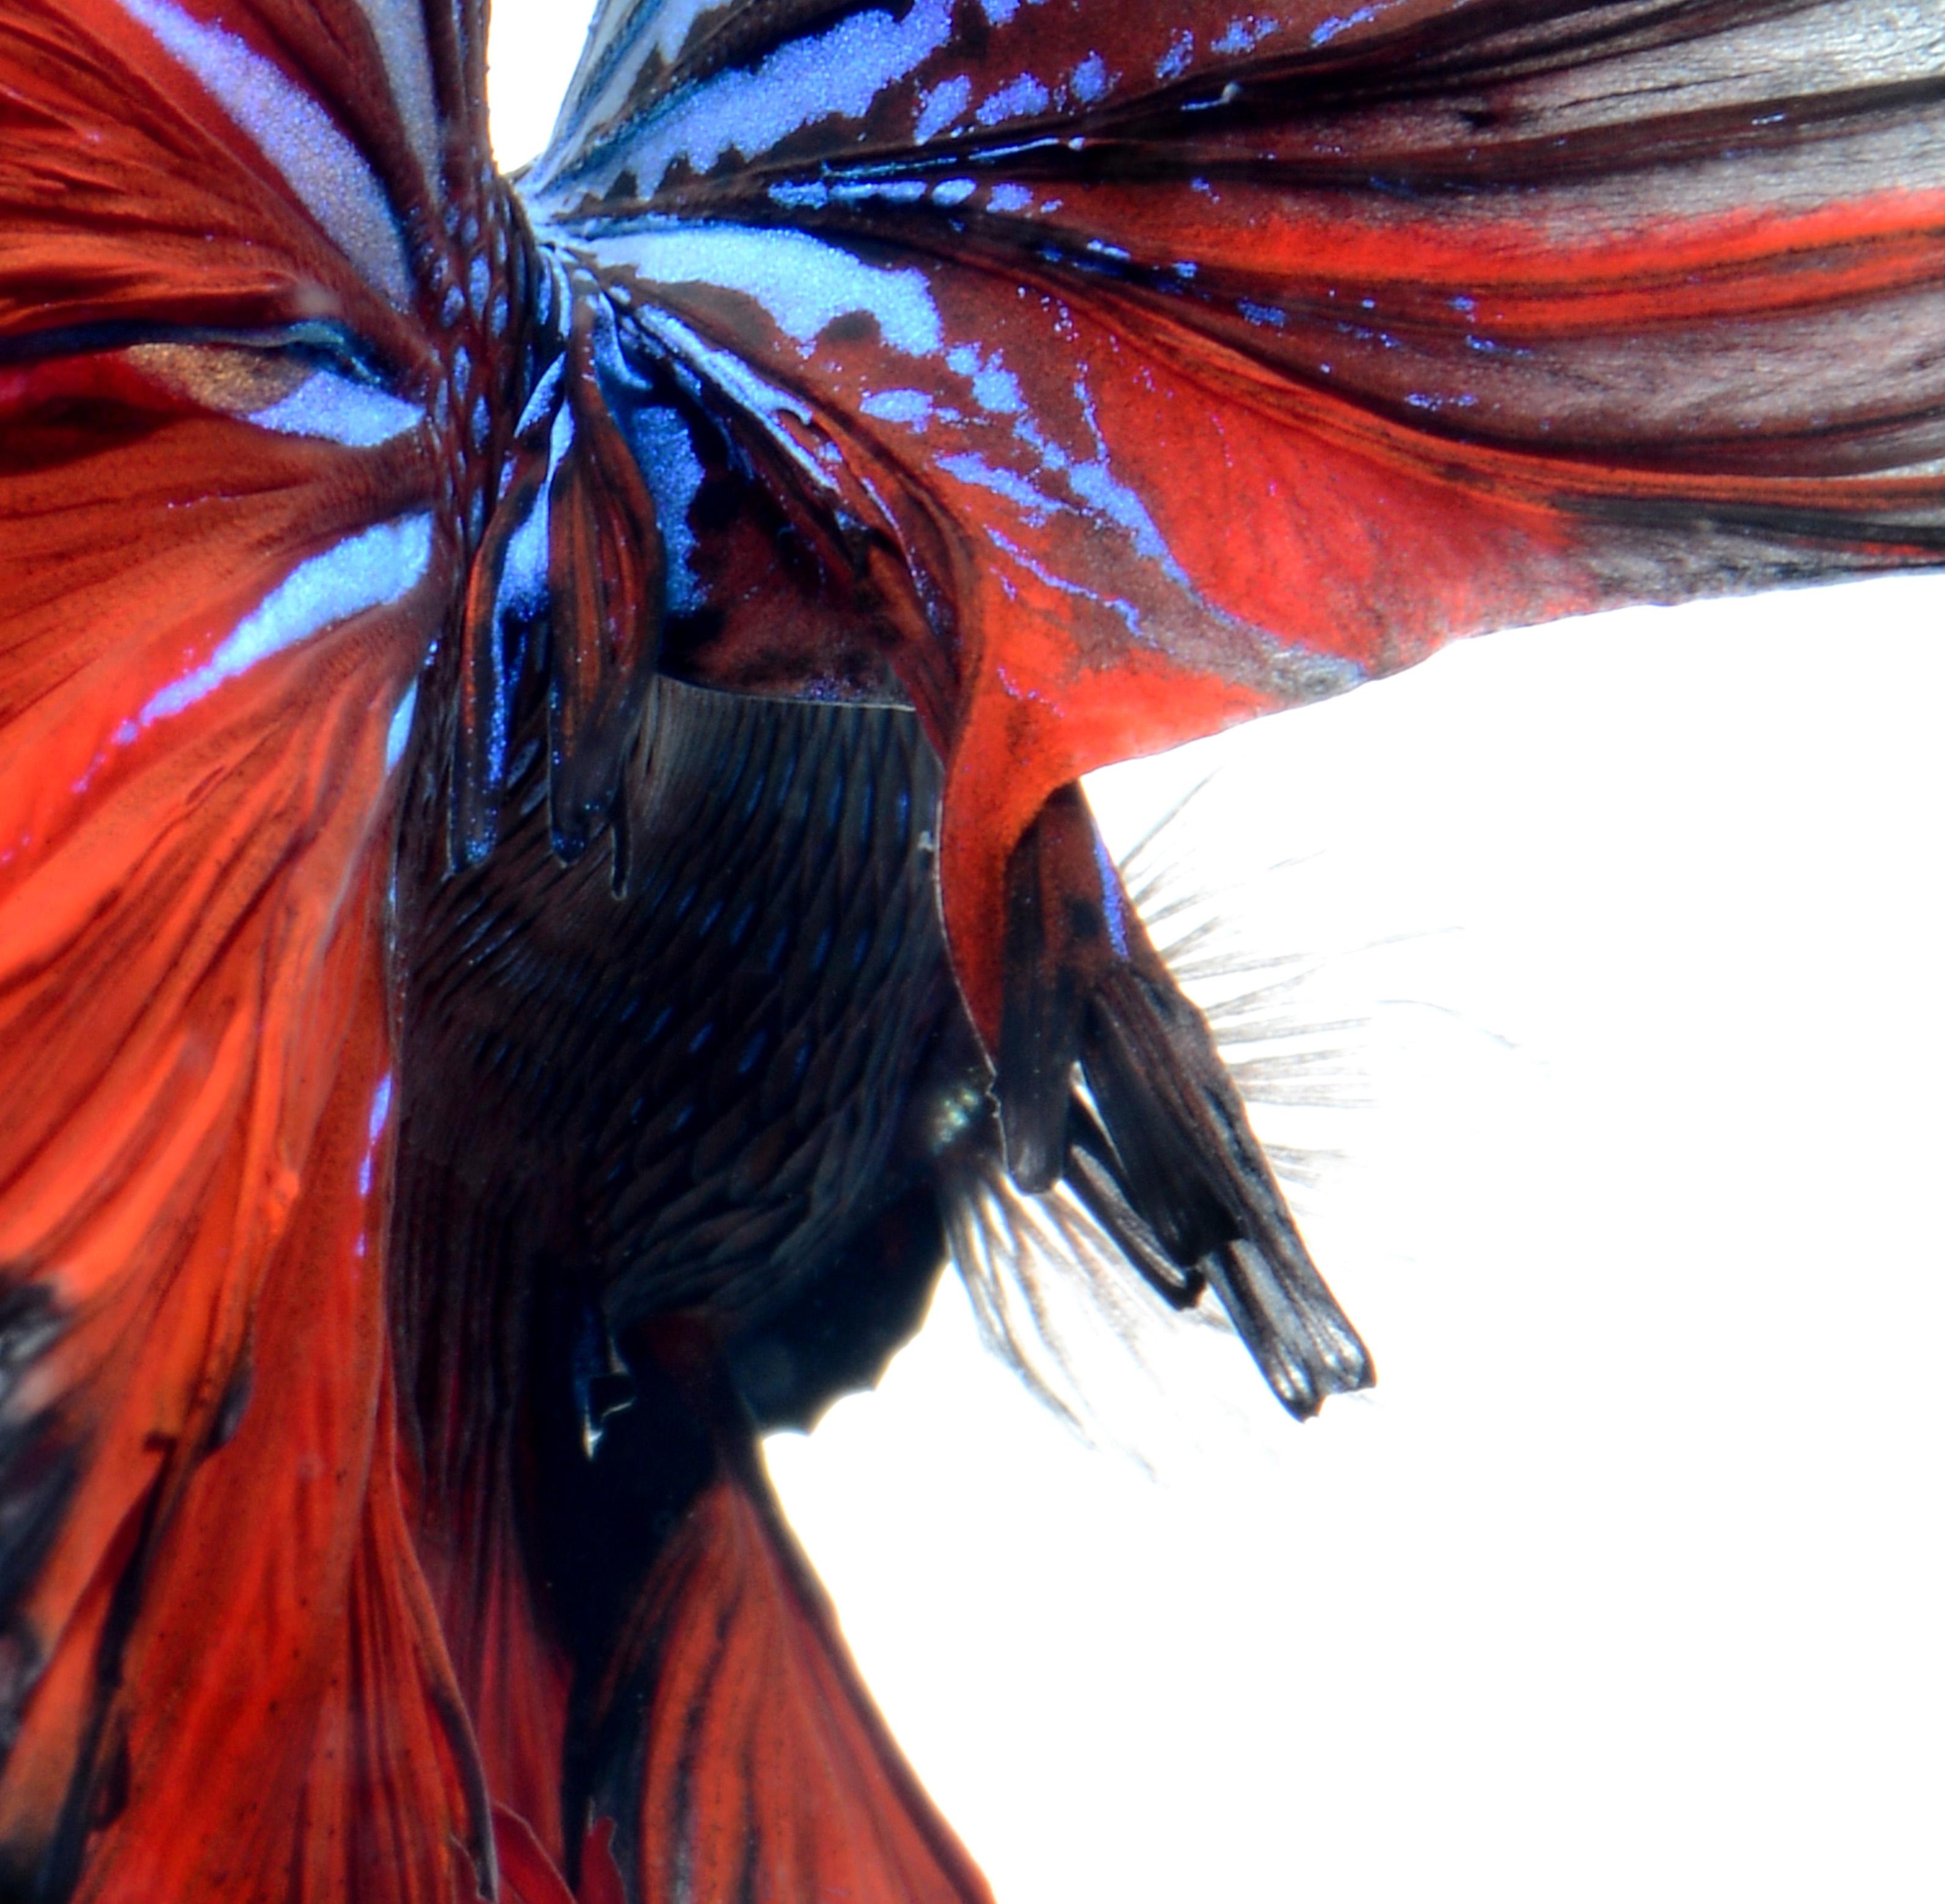 Wing of Fire is a photograph of colorful red and blue Siamese fighting fish on white background.  It is photography printed on glossy paper.  

The photograph comes in 2 sizes:
35.5